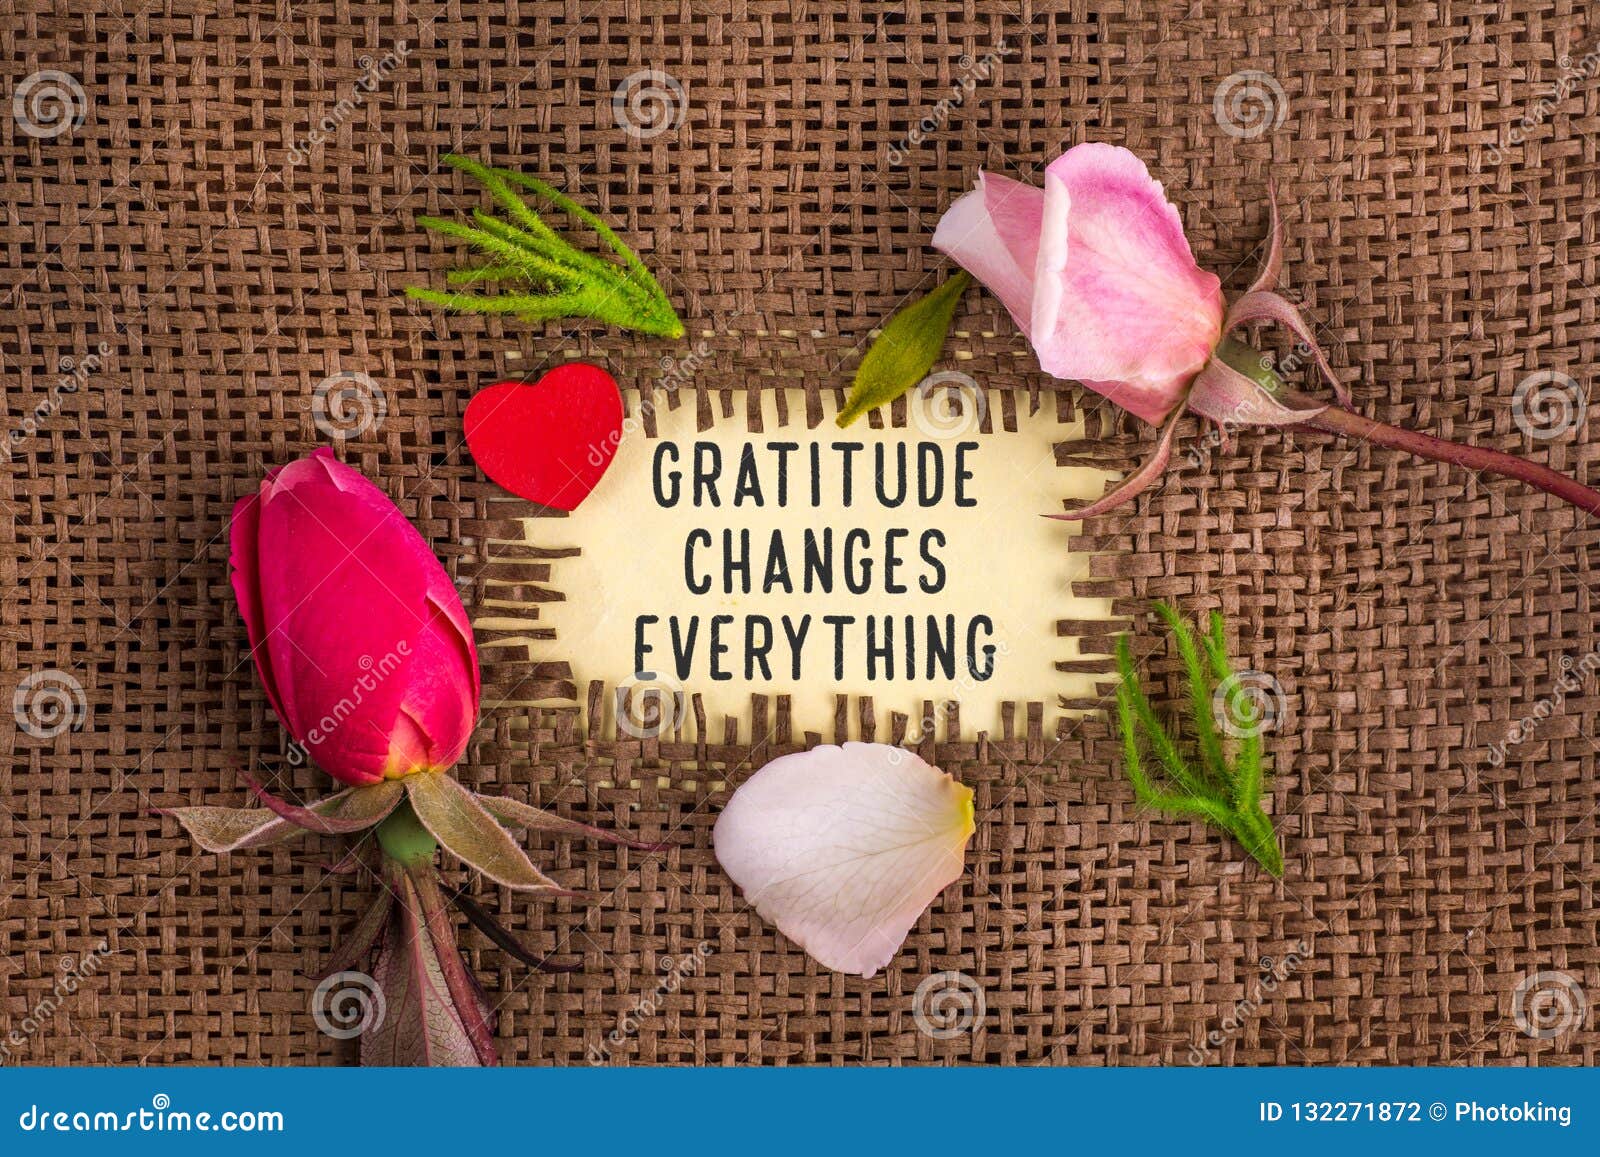 gratitude changes everything written in hole on the burlap